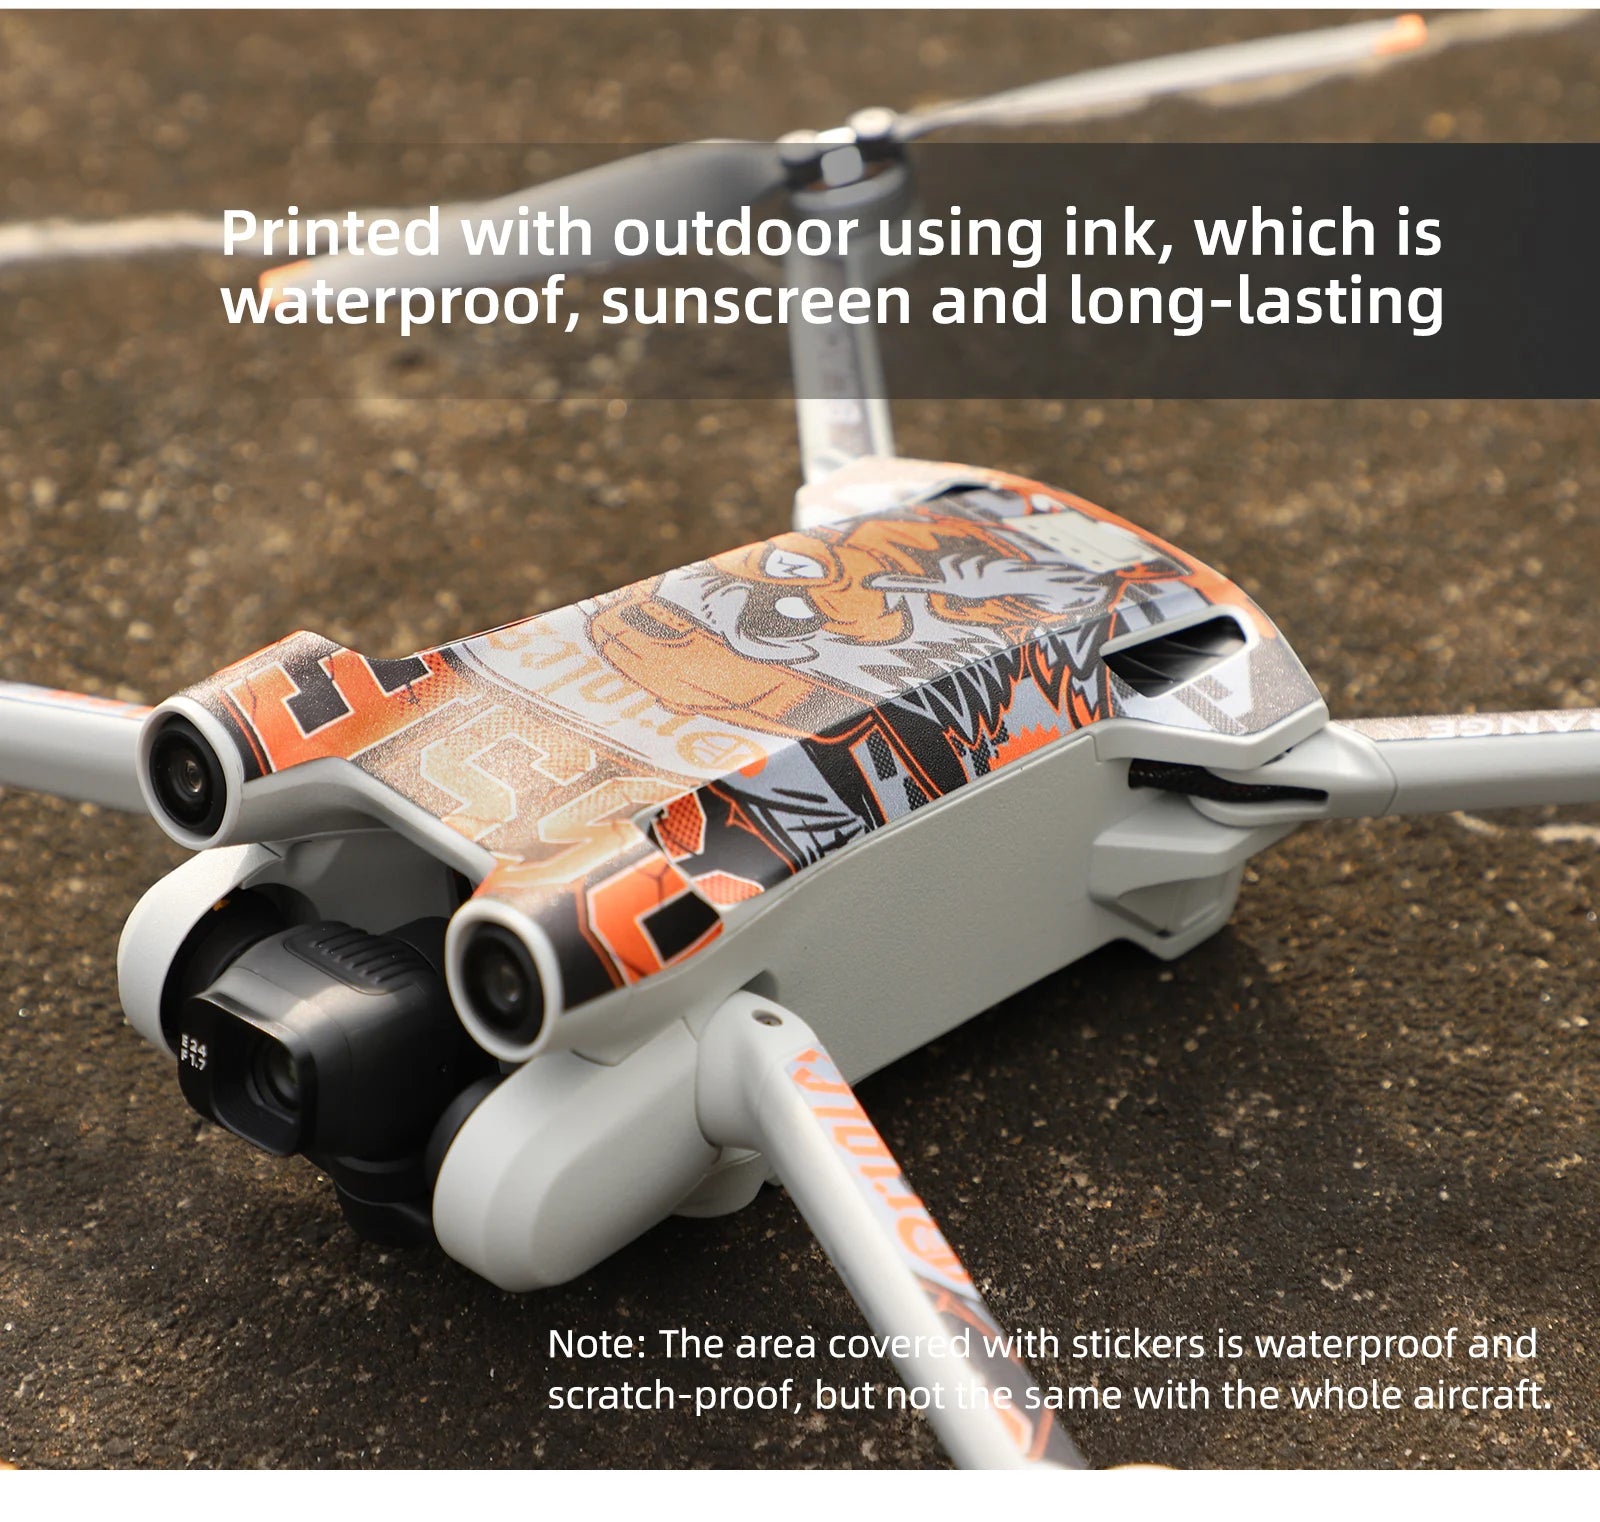 Printed with outdoor using ink, which is waterproof; sunscreen and long-lasting .